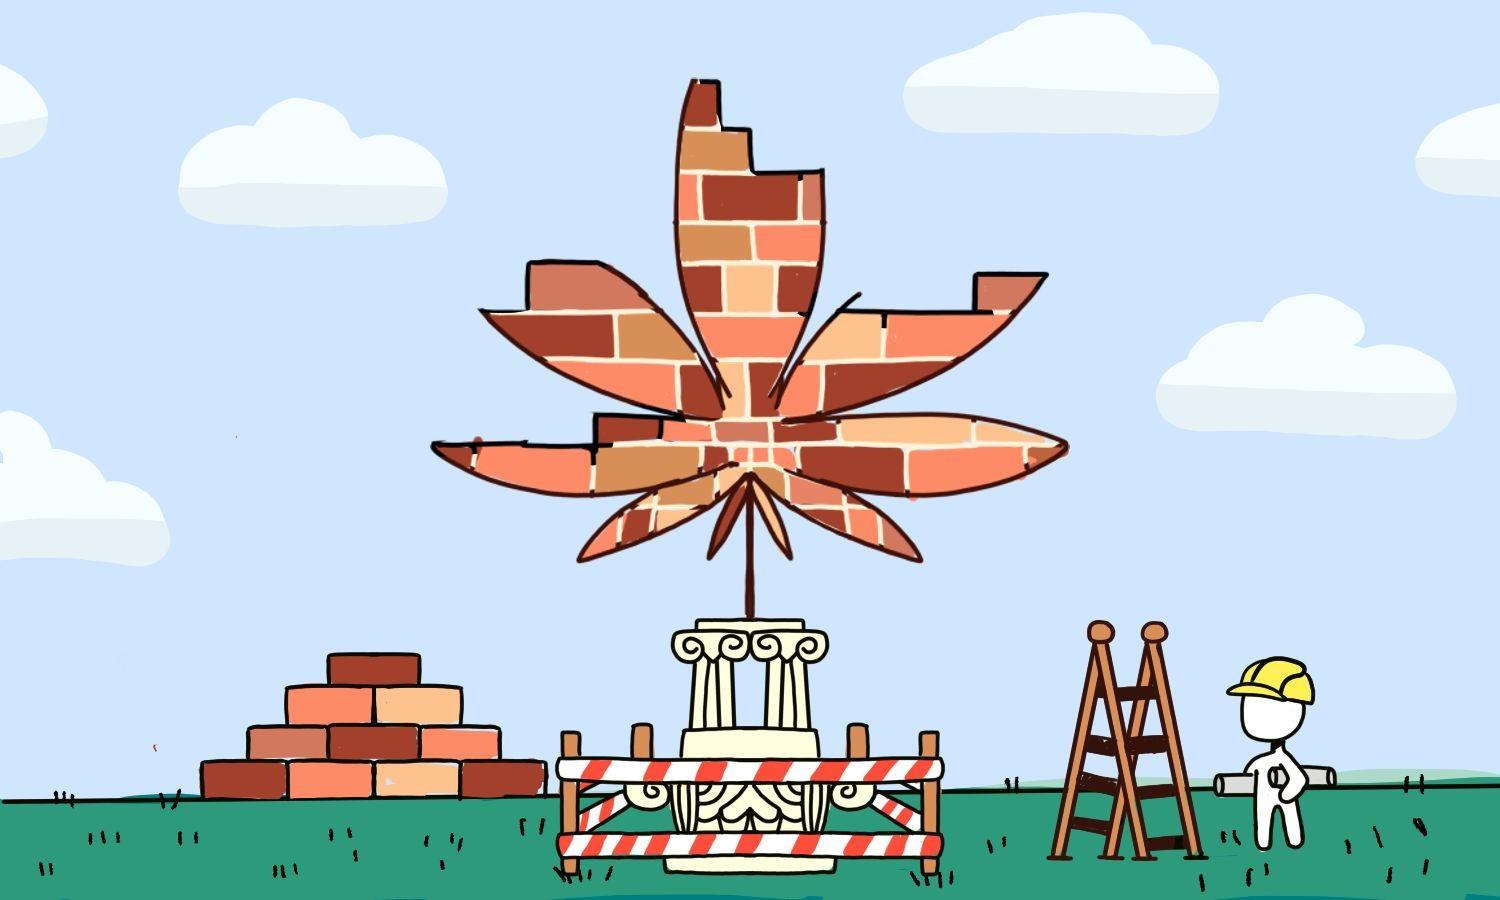 Illustration of cannabis leaf being built from brick like a building